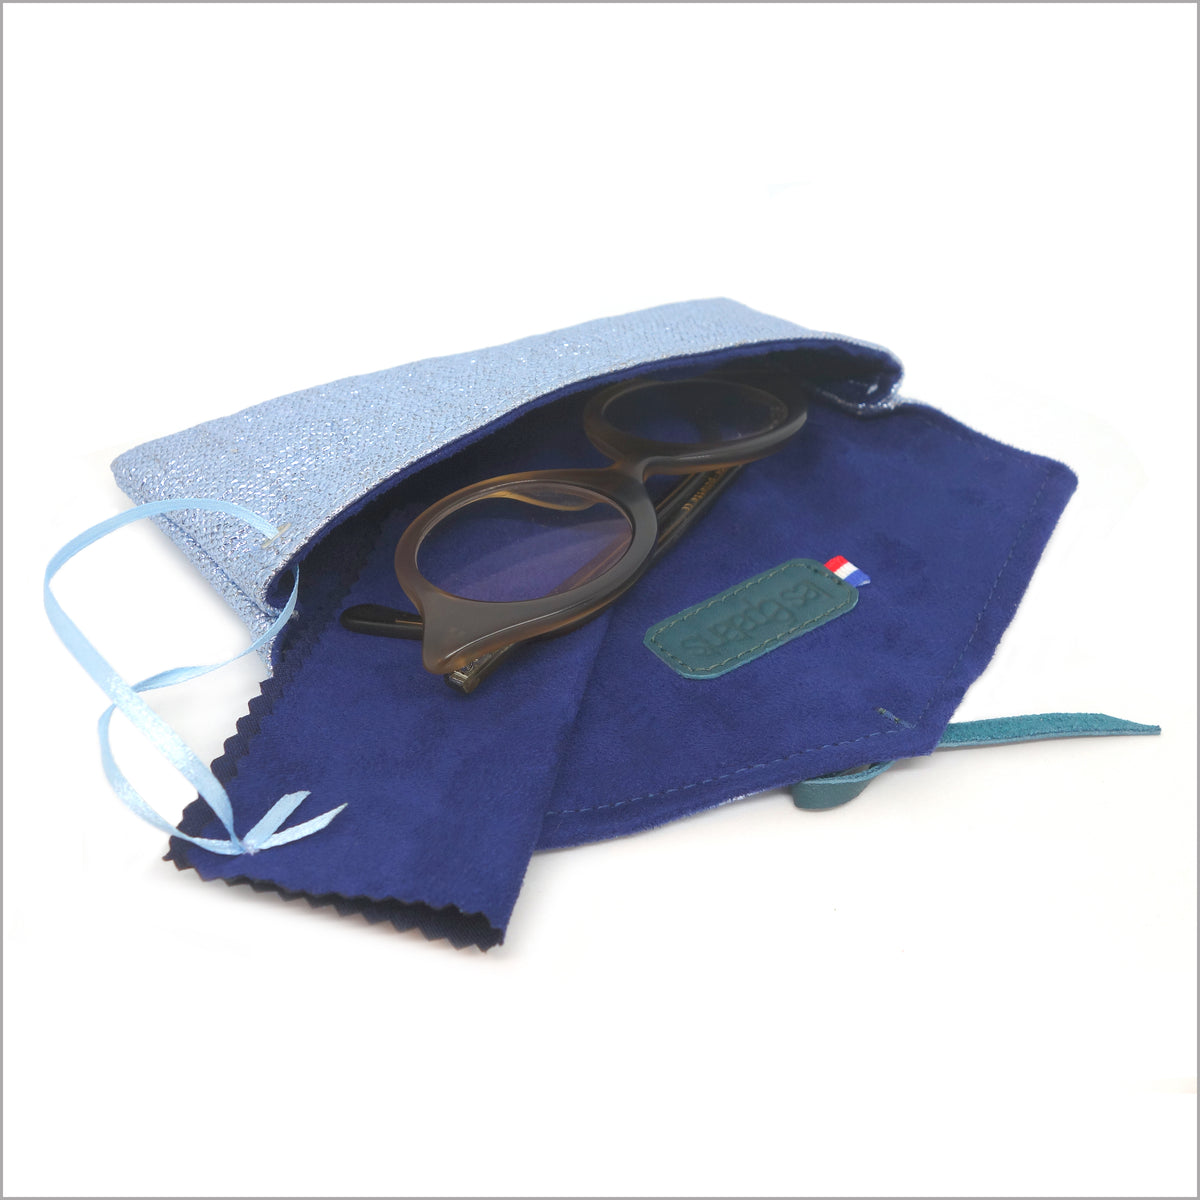 Soft glasses case in shiny blue coated linen